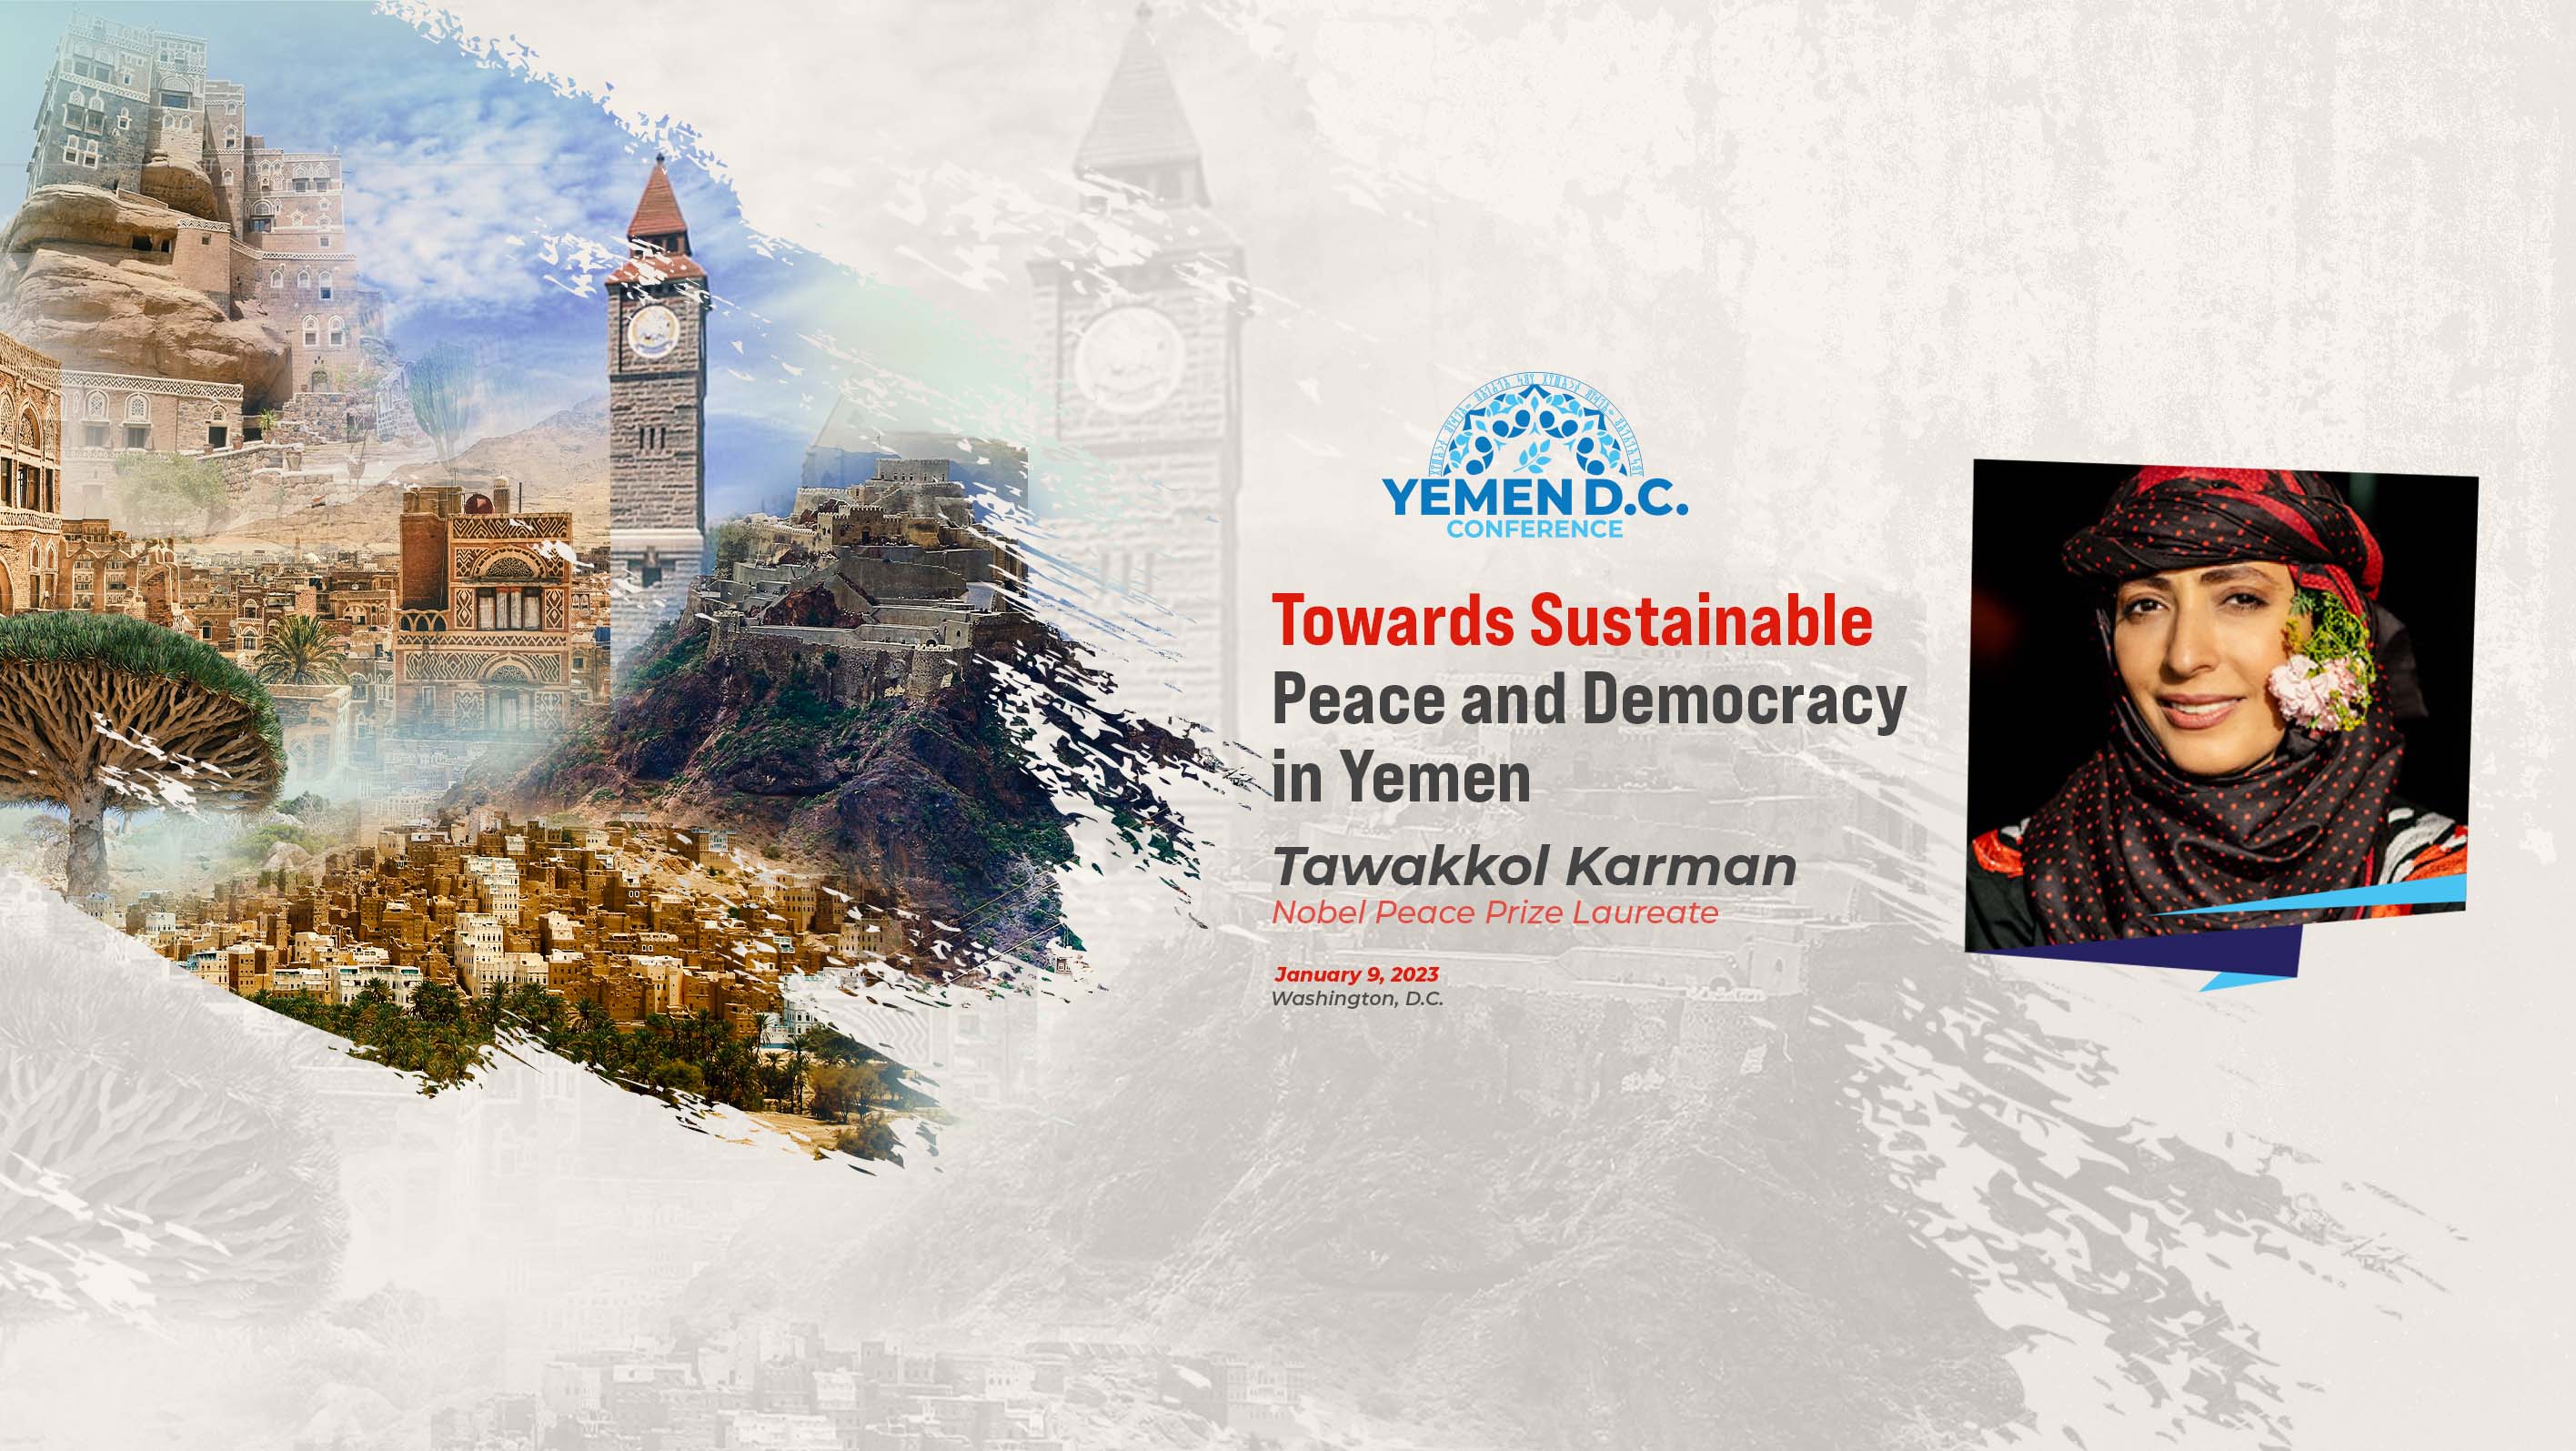 Mrs. Karman takes part in “Towards Sustainable Peace and Democracy in Yemen” in Washington